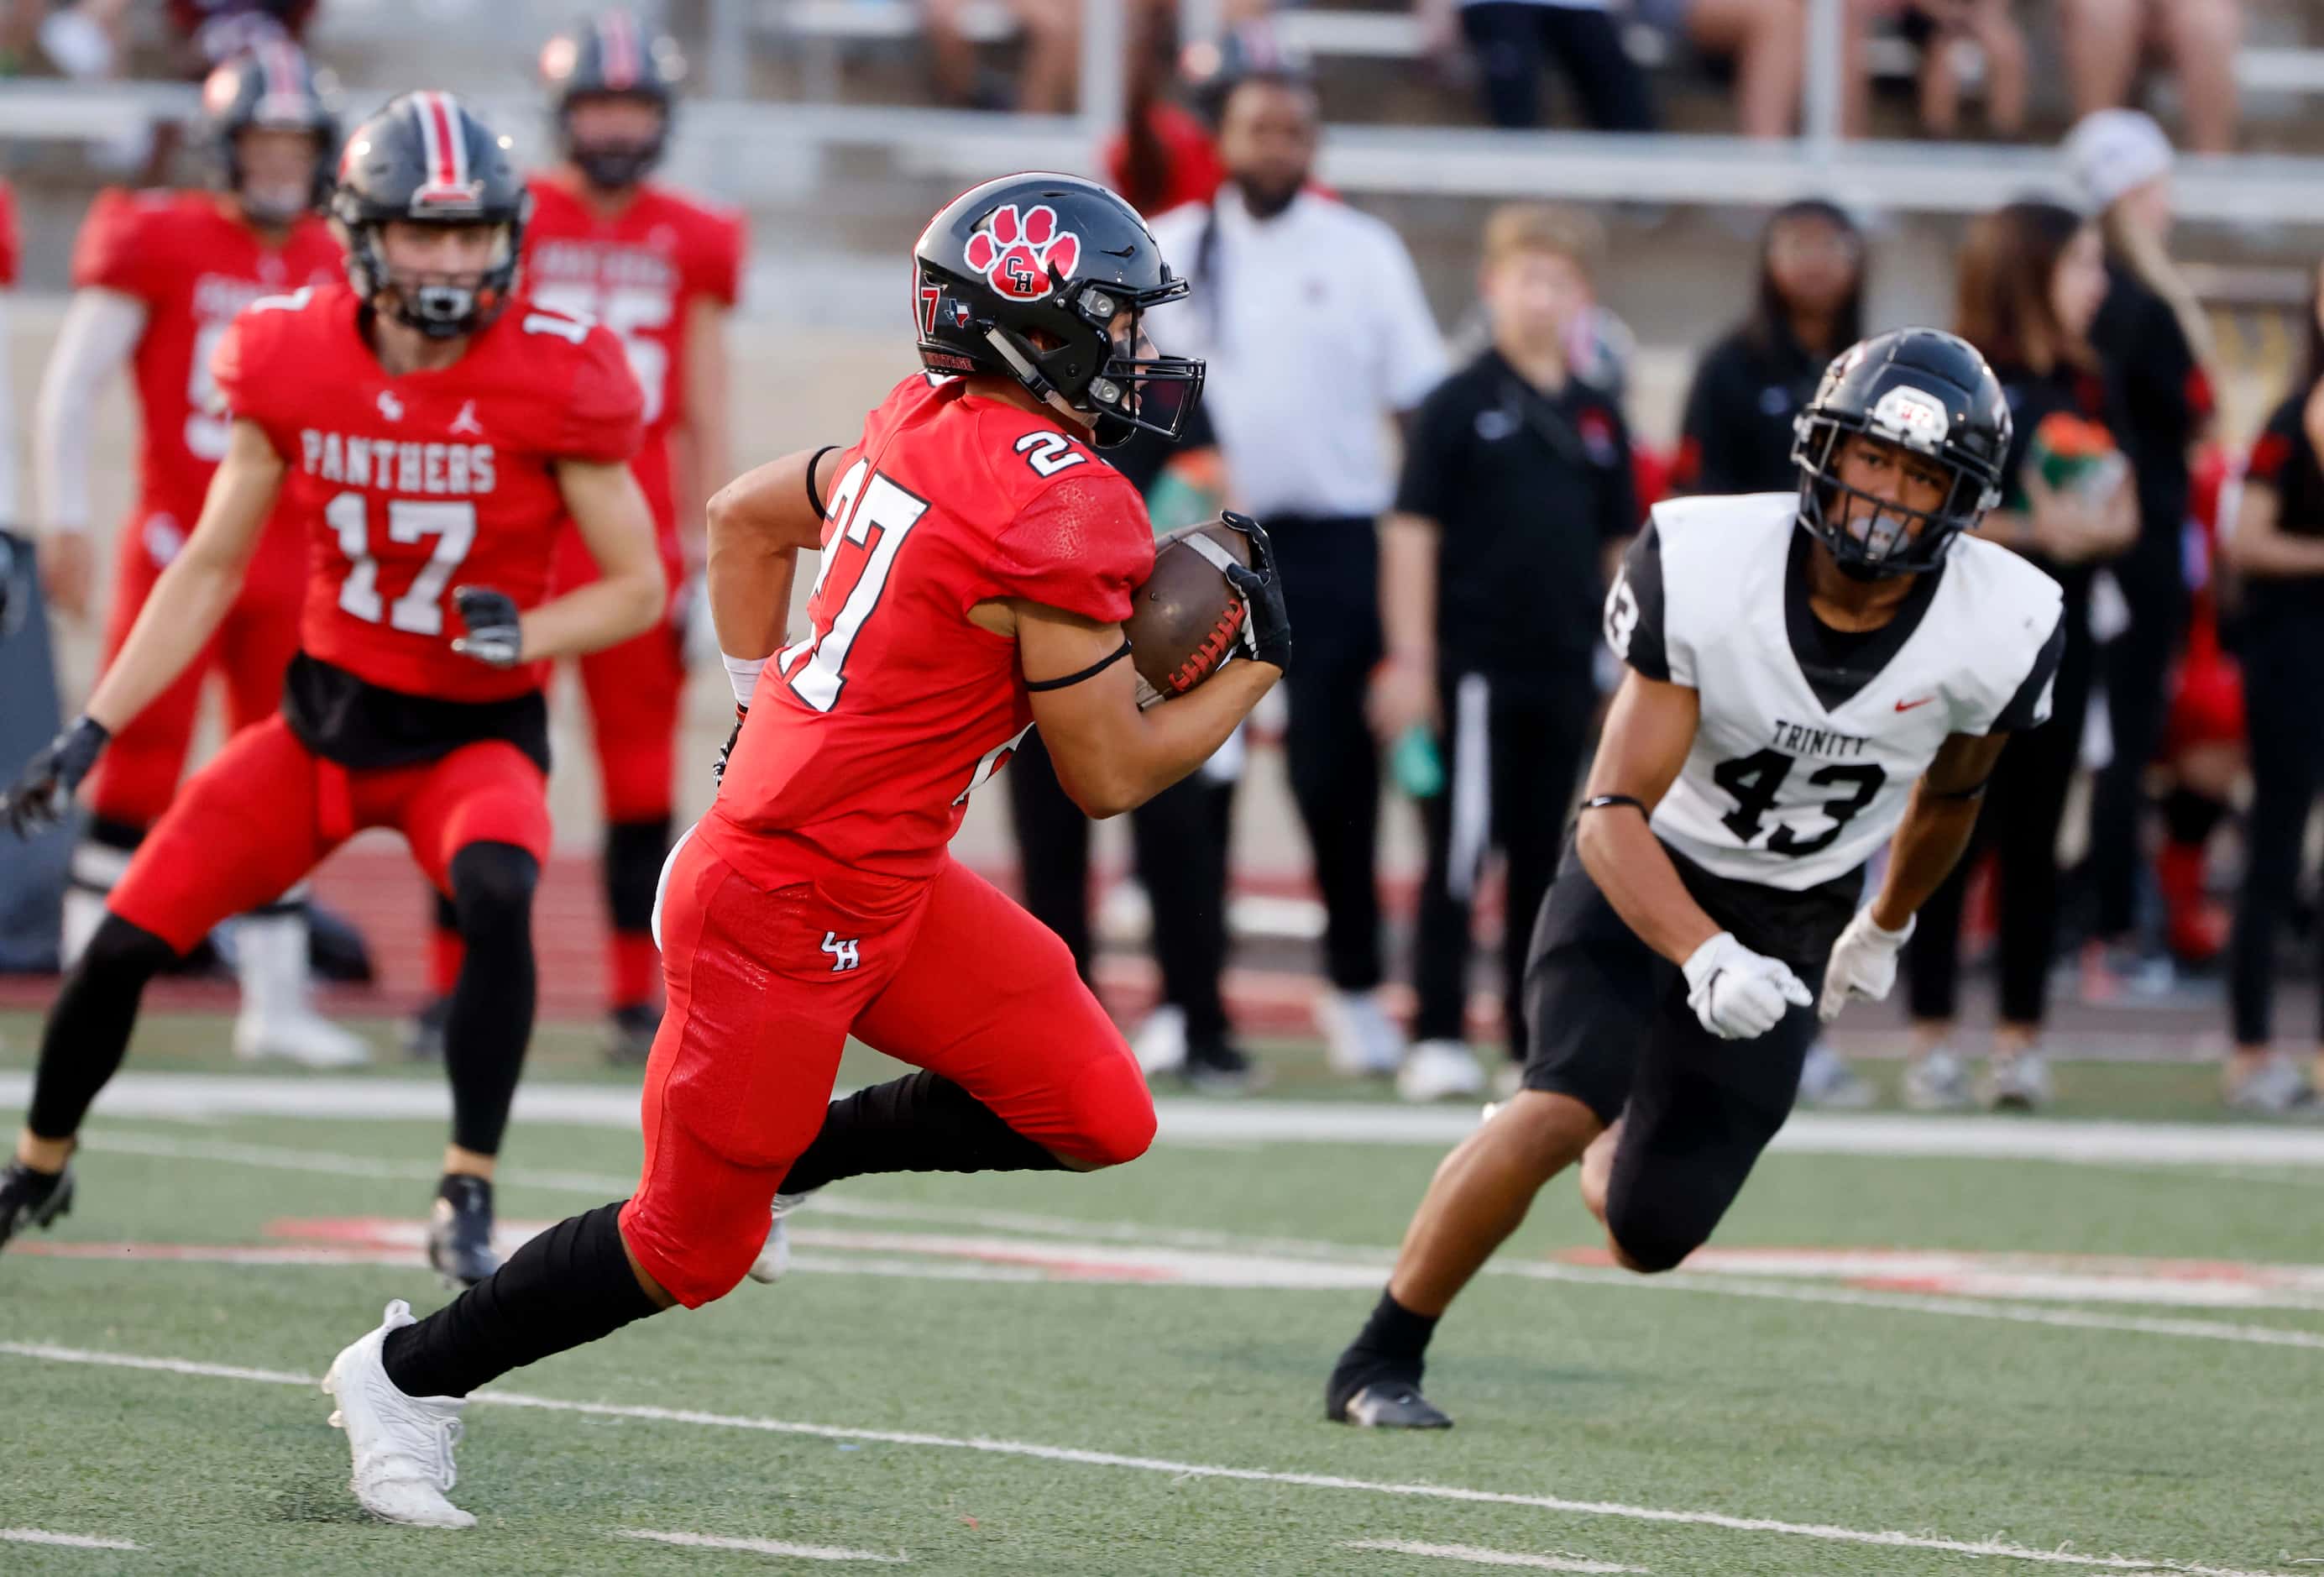 Colleyville heritage player Riley Wormley  (27) runs a kick back 63 yards as Trinity’s...